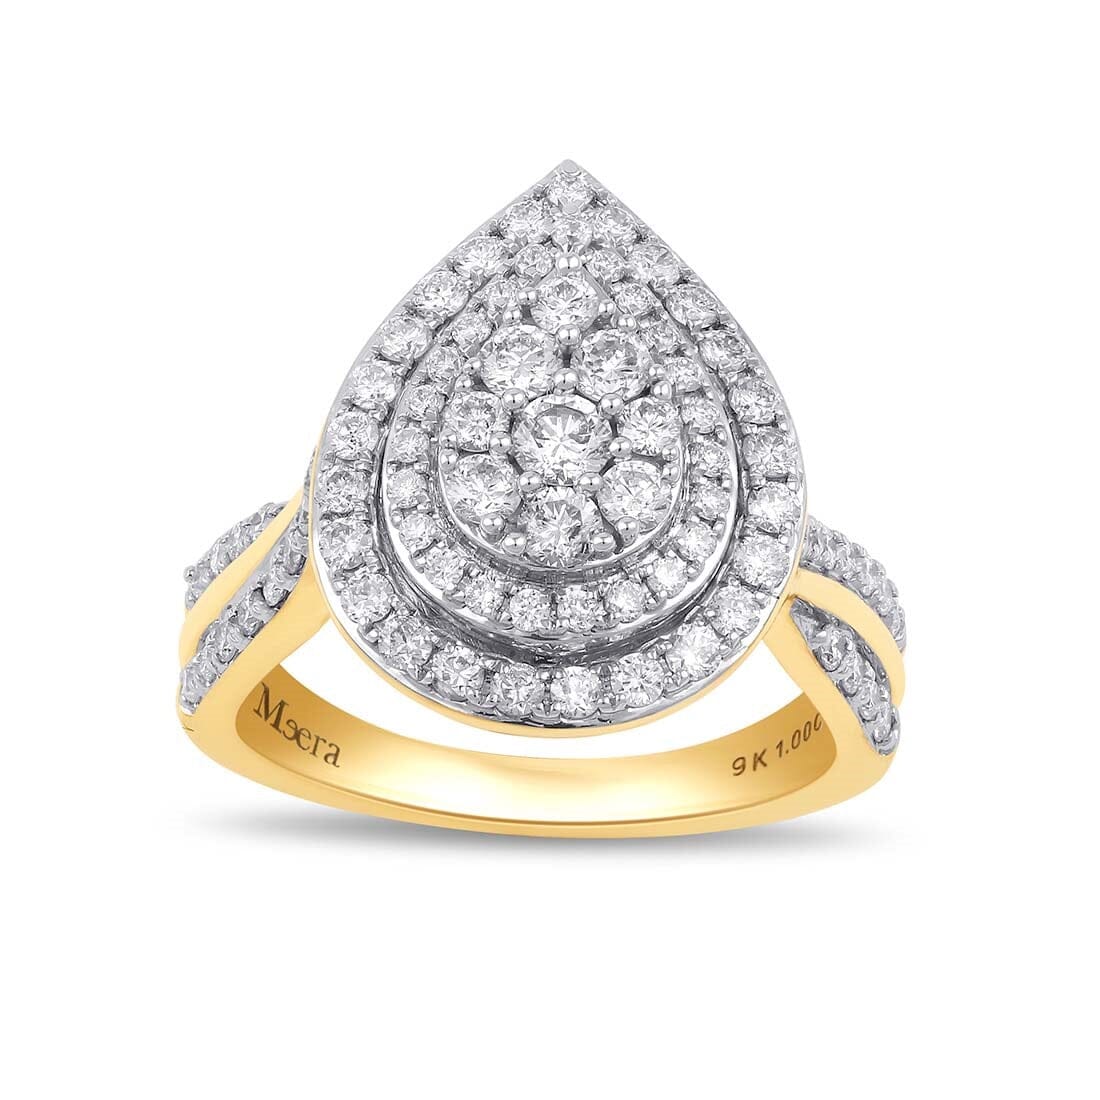 Meera Double Pear Halo Ring with 1.00ct of Laboratory Grown Diamonds in 9ct Yellow Gold Rings Bevilles 